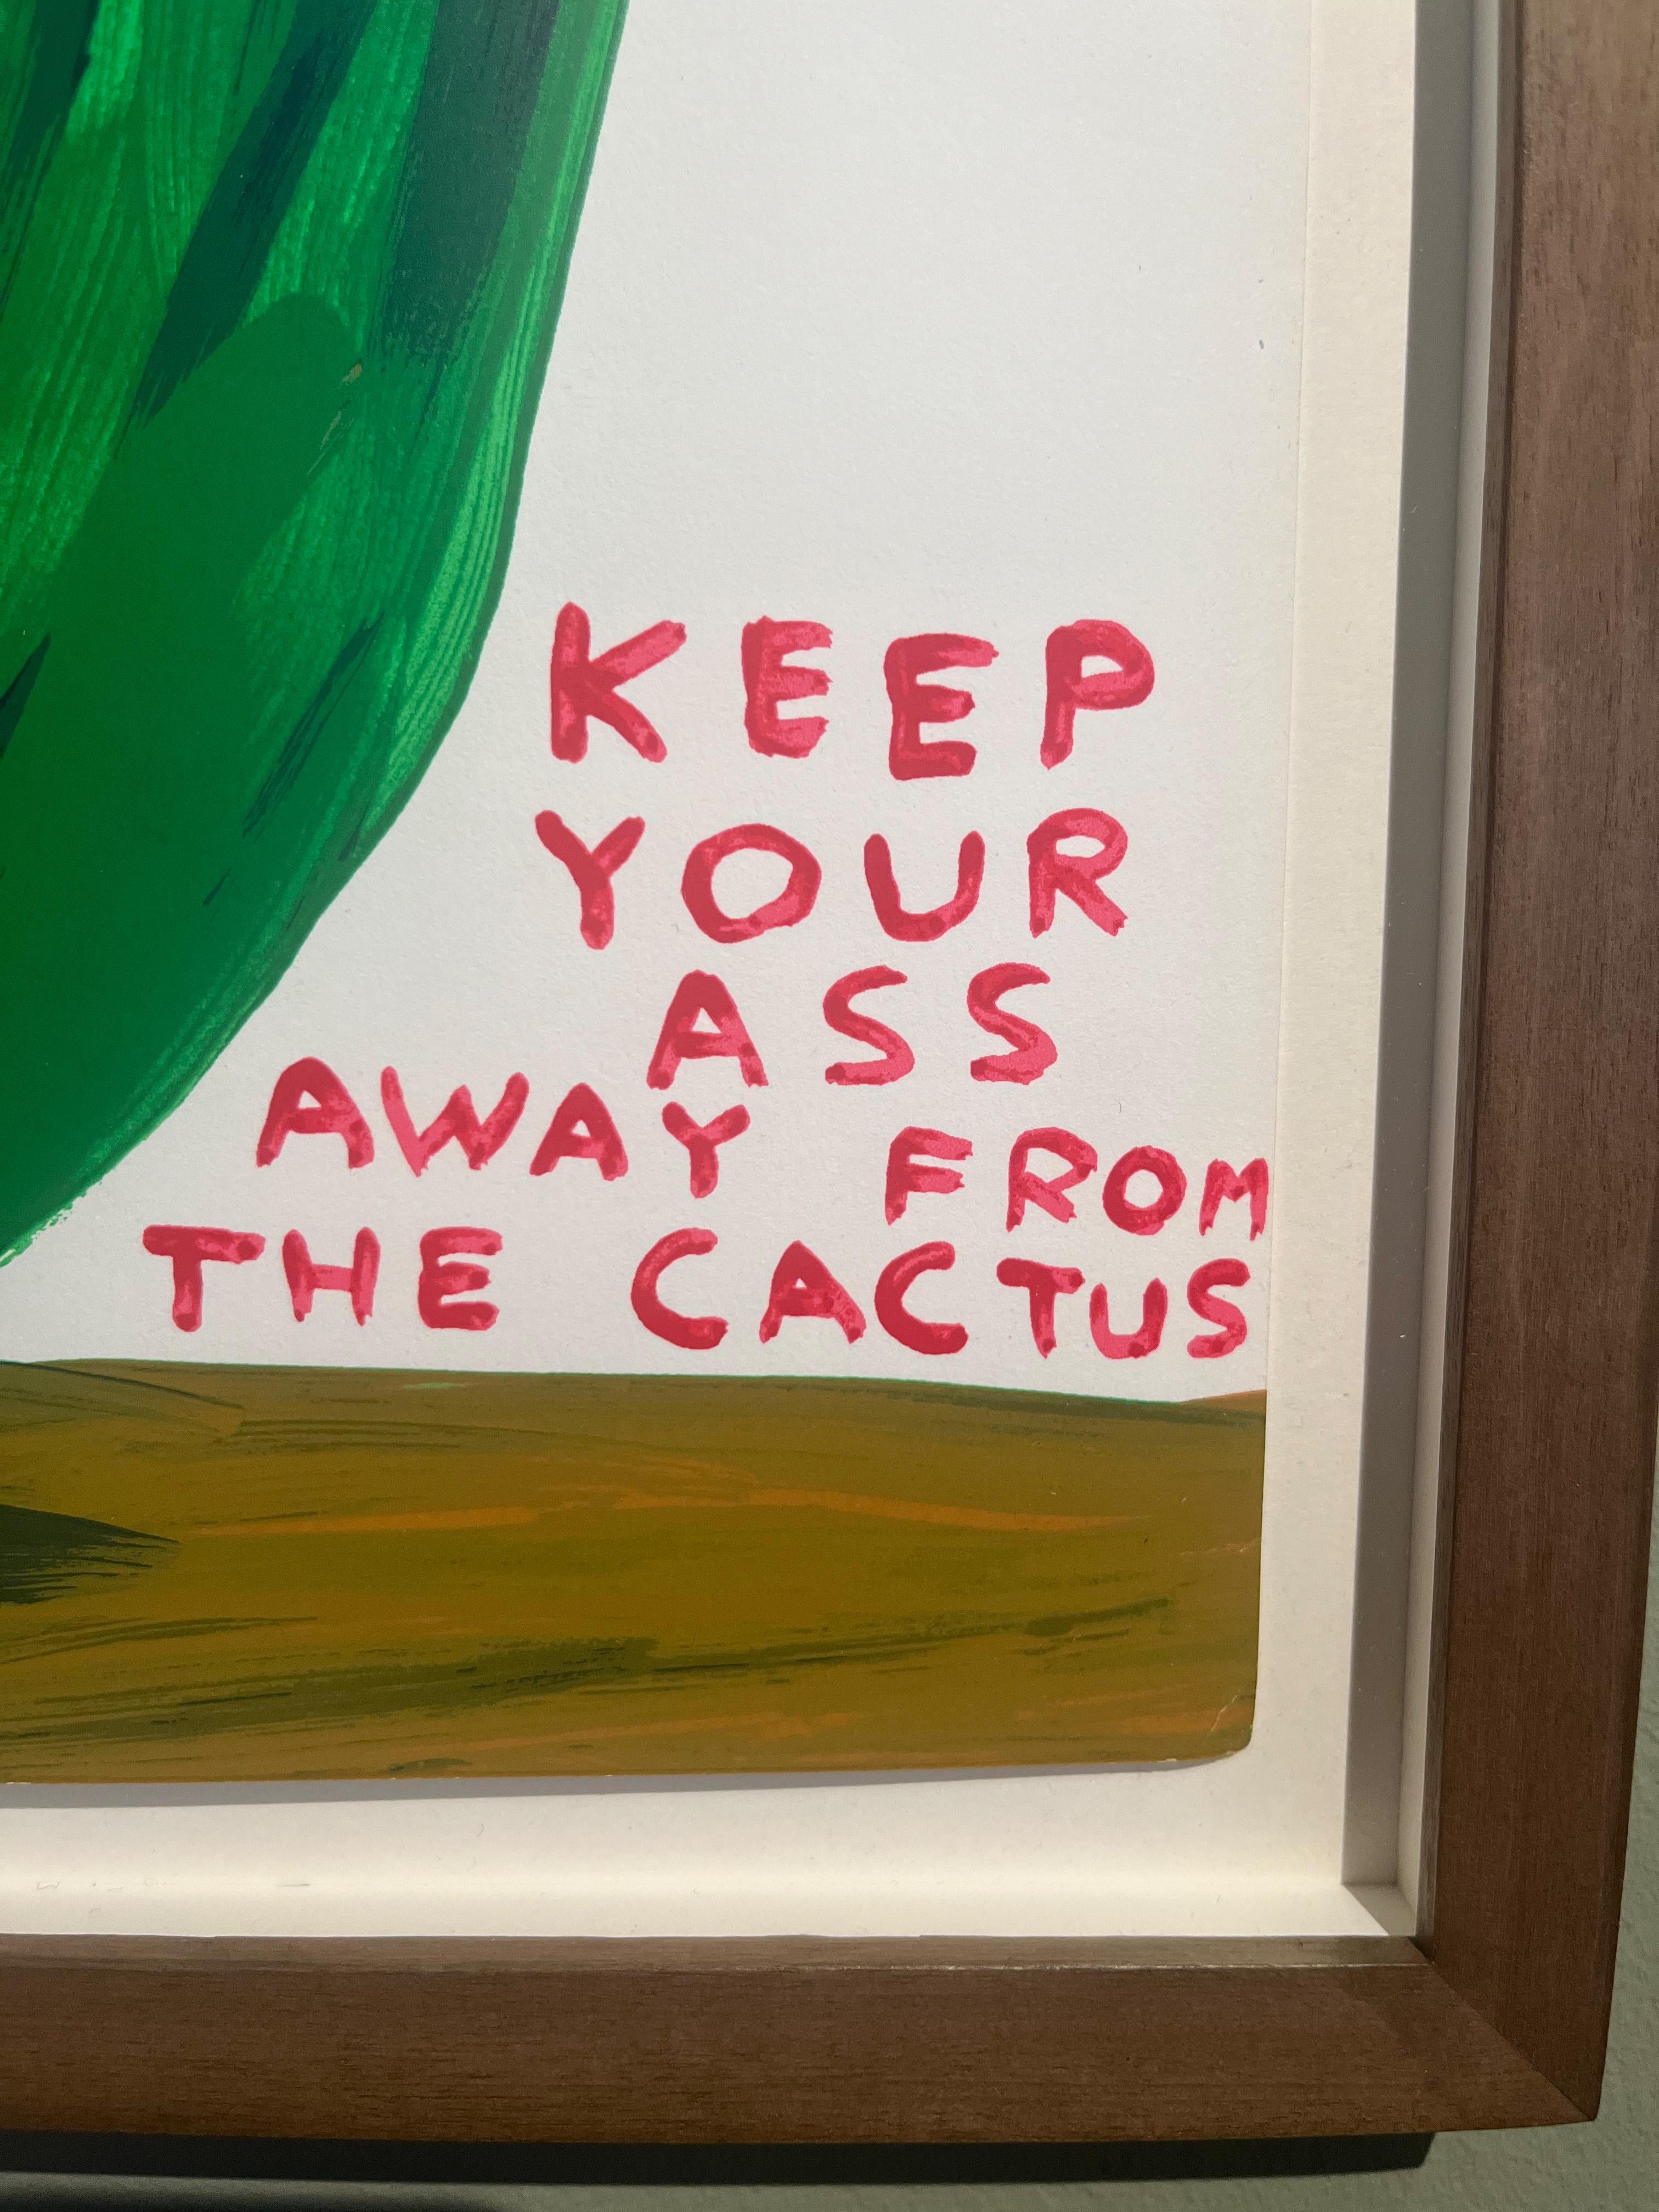 'Keep Your Ass Away From the Cactus' by David Shrigley, 2020

Screenprint in Colours on Wove, signed and numbered from the Edition of 125 in Pencil, published by AllRightsReserved, Hong Kong, sheet 76 x 56cm, framed.

Shrigley was born in